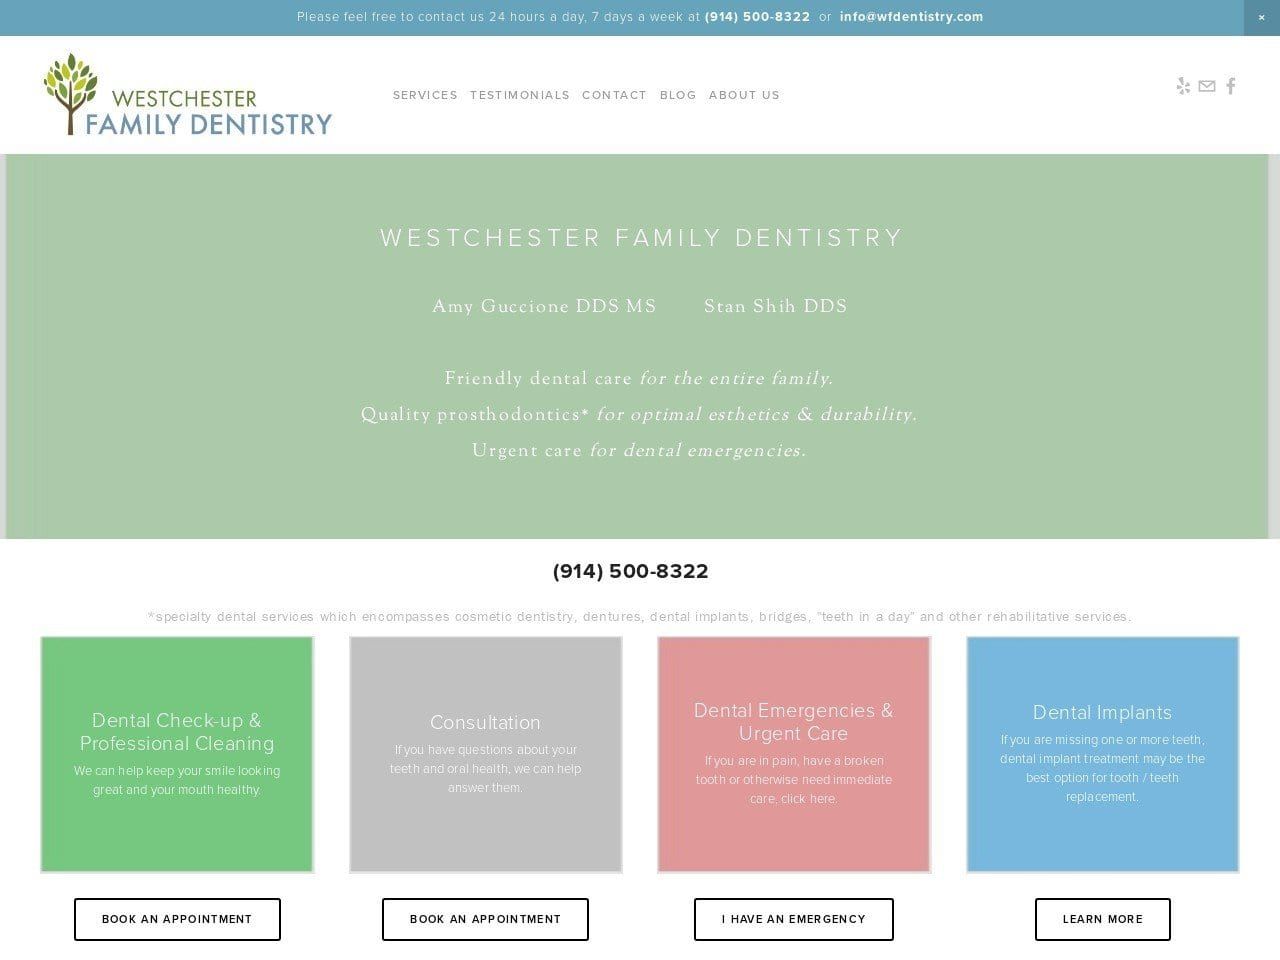 Amy Shih DDS Website Screenshot from wfdentistry.com